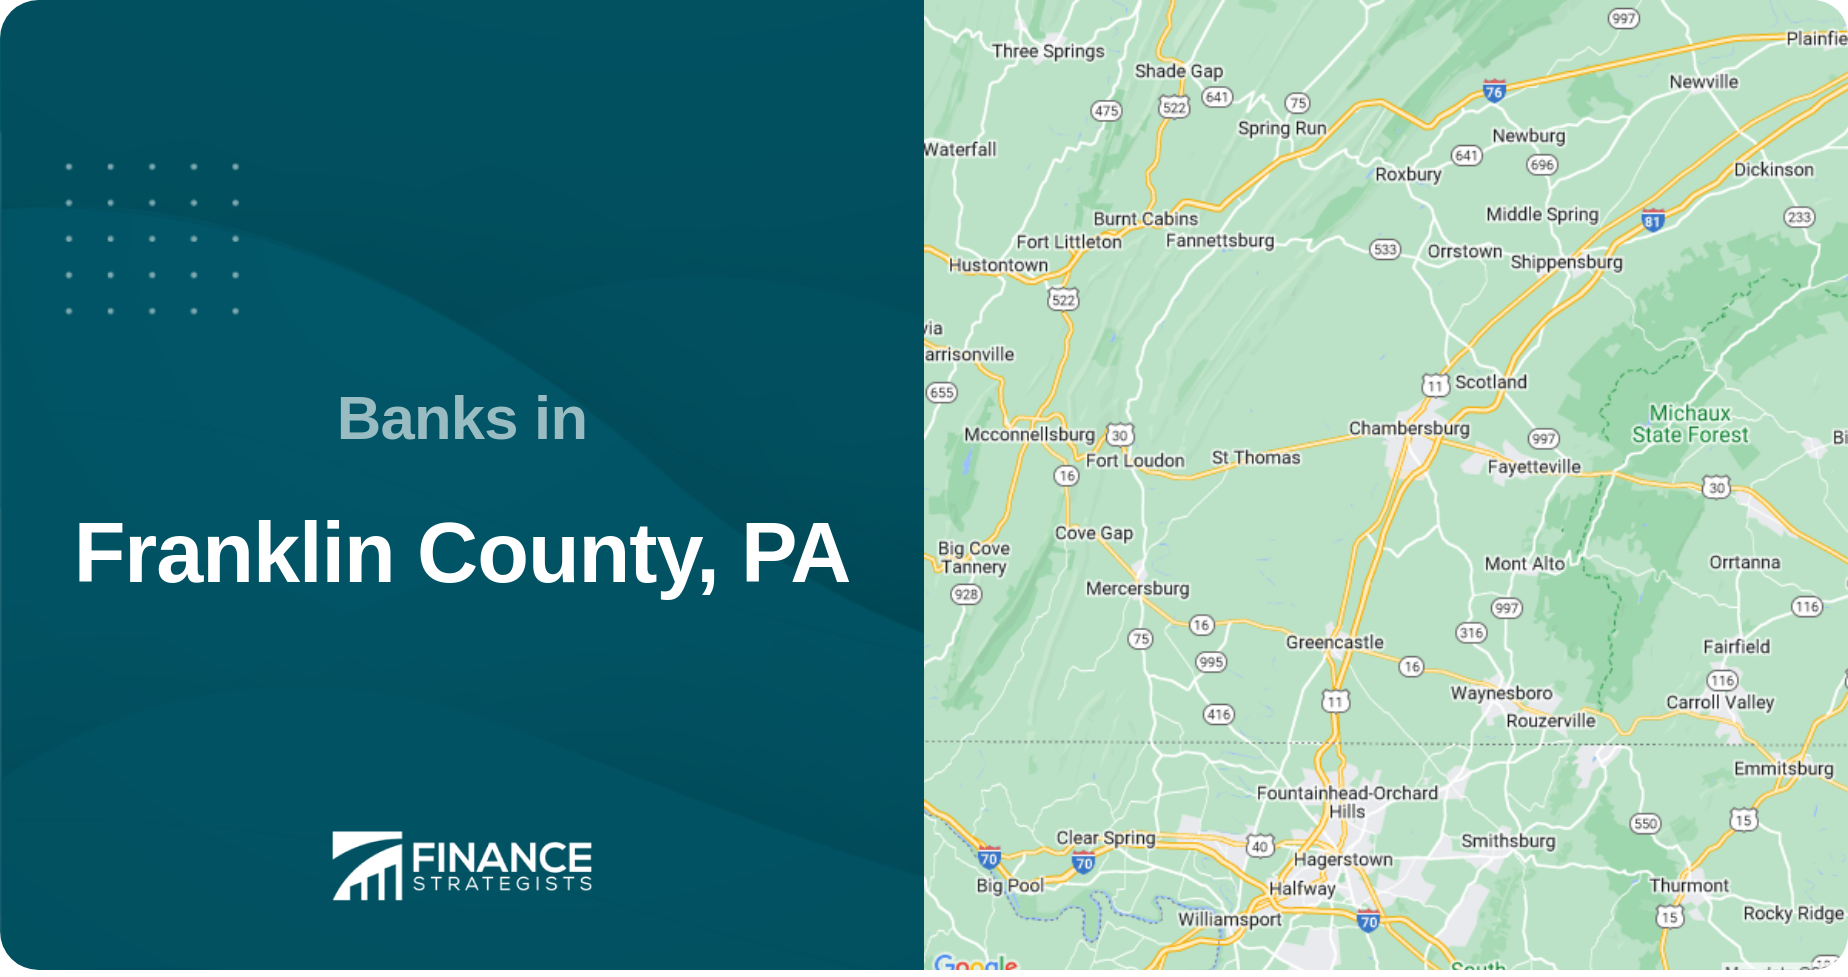 Banks in Franklin County, PA